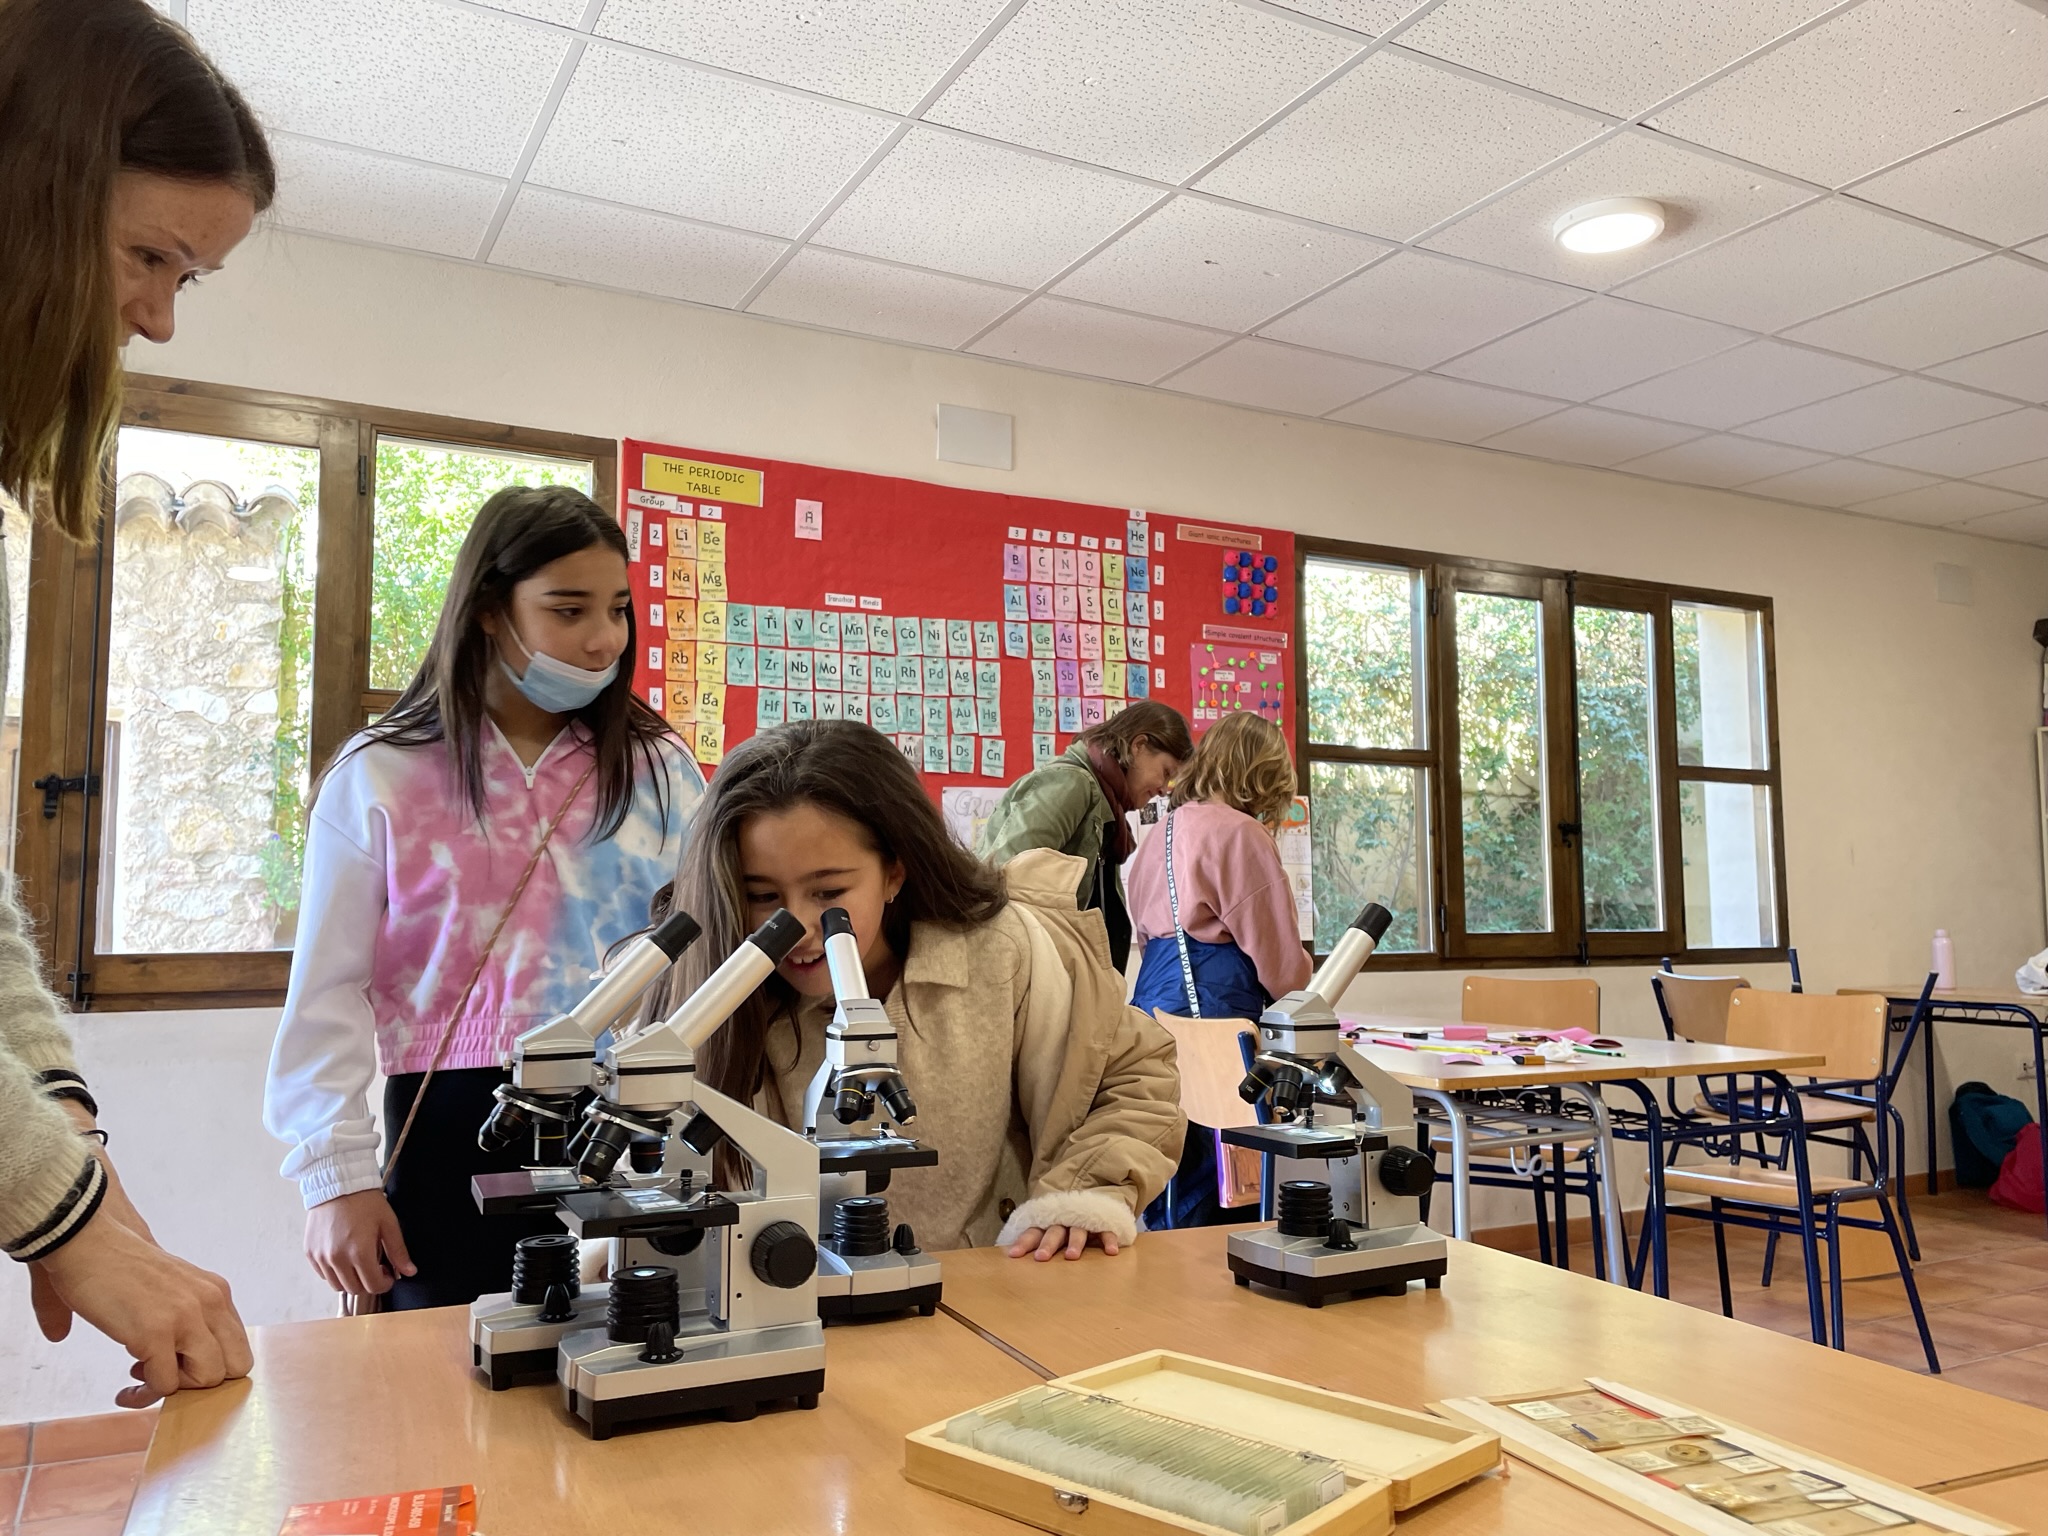 <b>Science Club (Class 2 to 5 students) - Gillian Henry, Wednesday 15:45 - 16:30, </b><div><i>Our Science Club is a unique opportunity for primary students to experience and experimetn the magic of science with our great science teacher Gillian Henry</i></div>